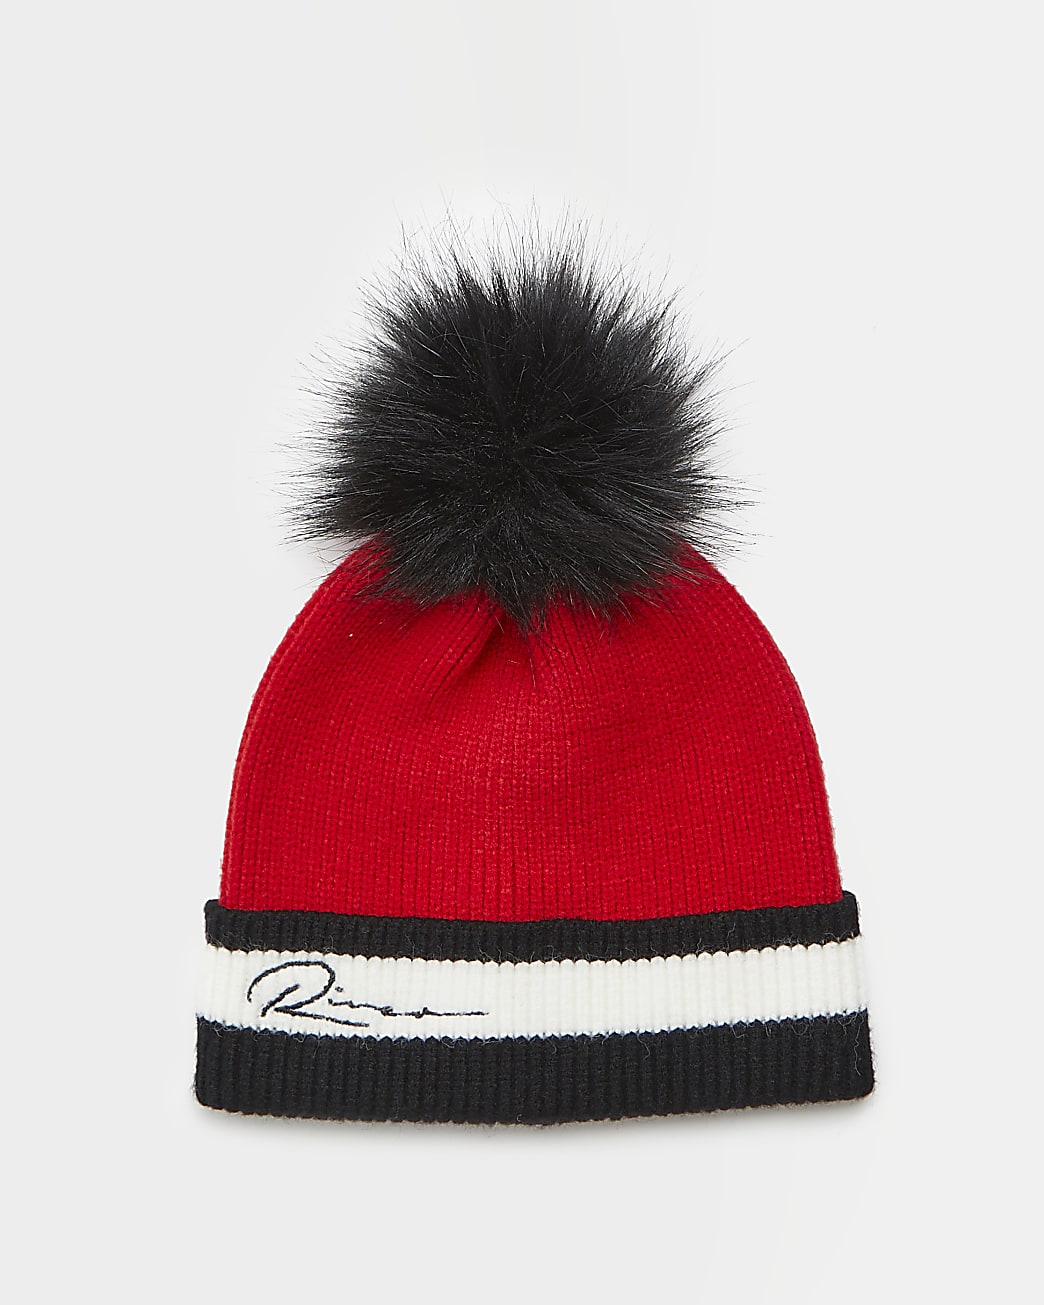 Boys red River knit beanie hat